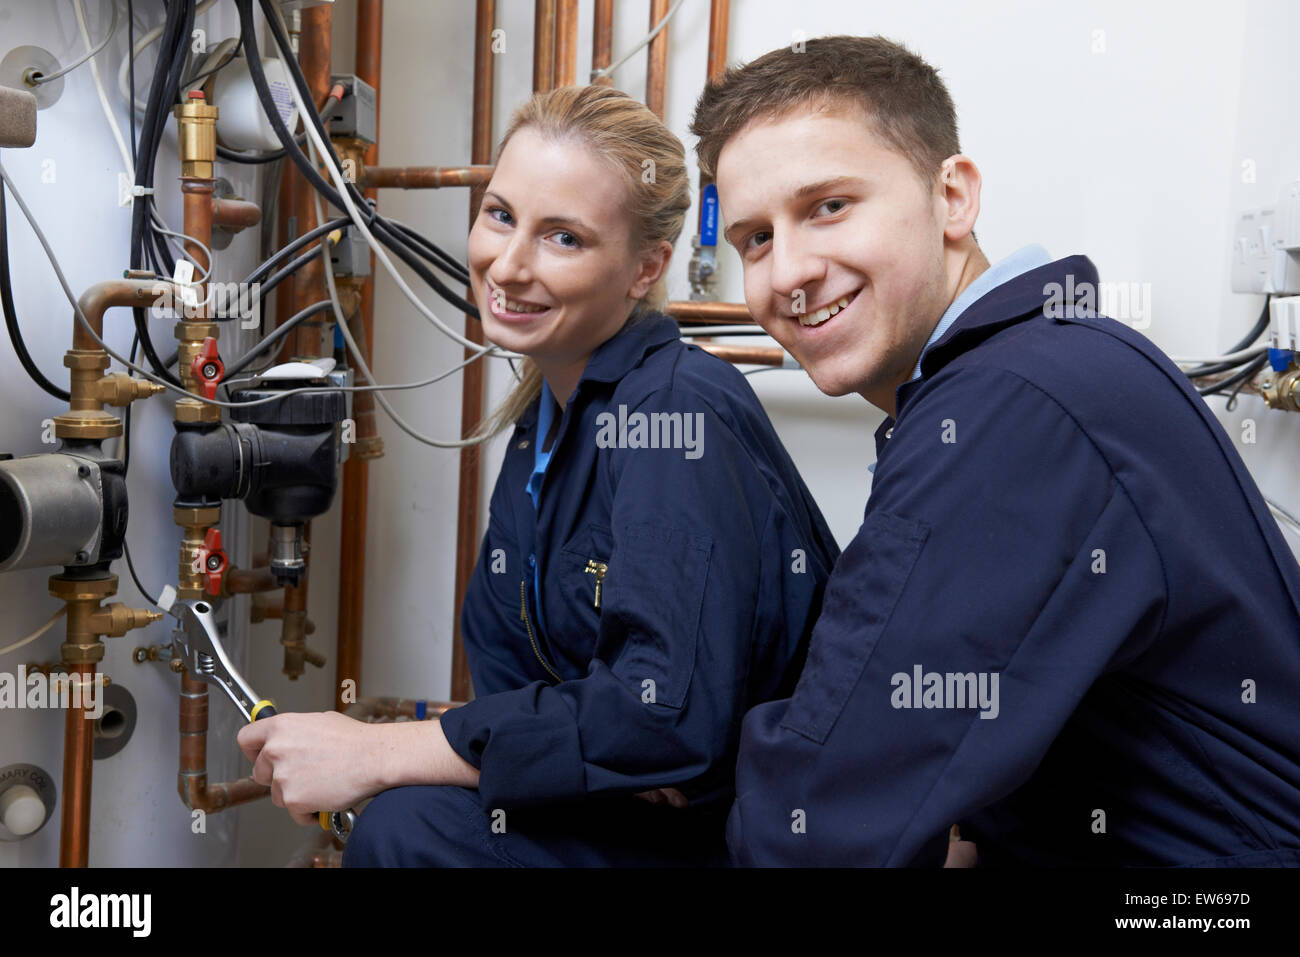 Female Trainee Plumber Working On Central Heating Boiler Stock Photo